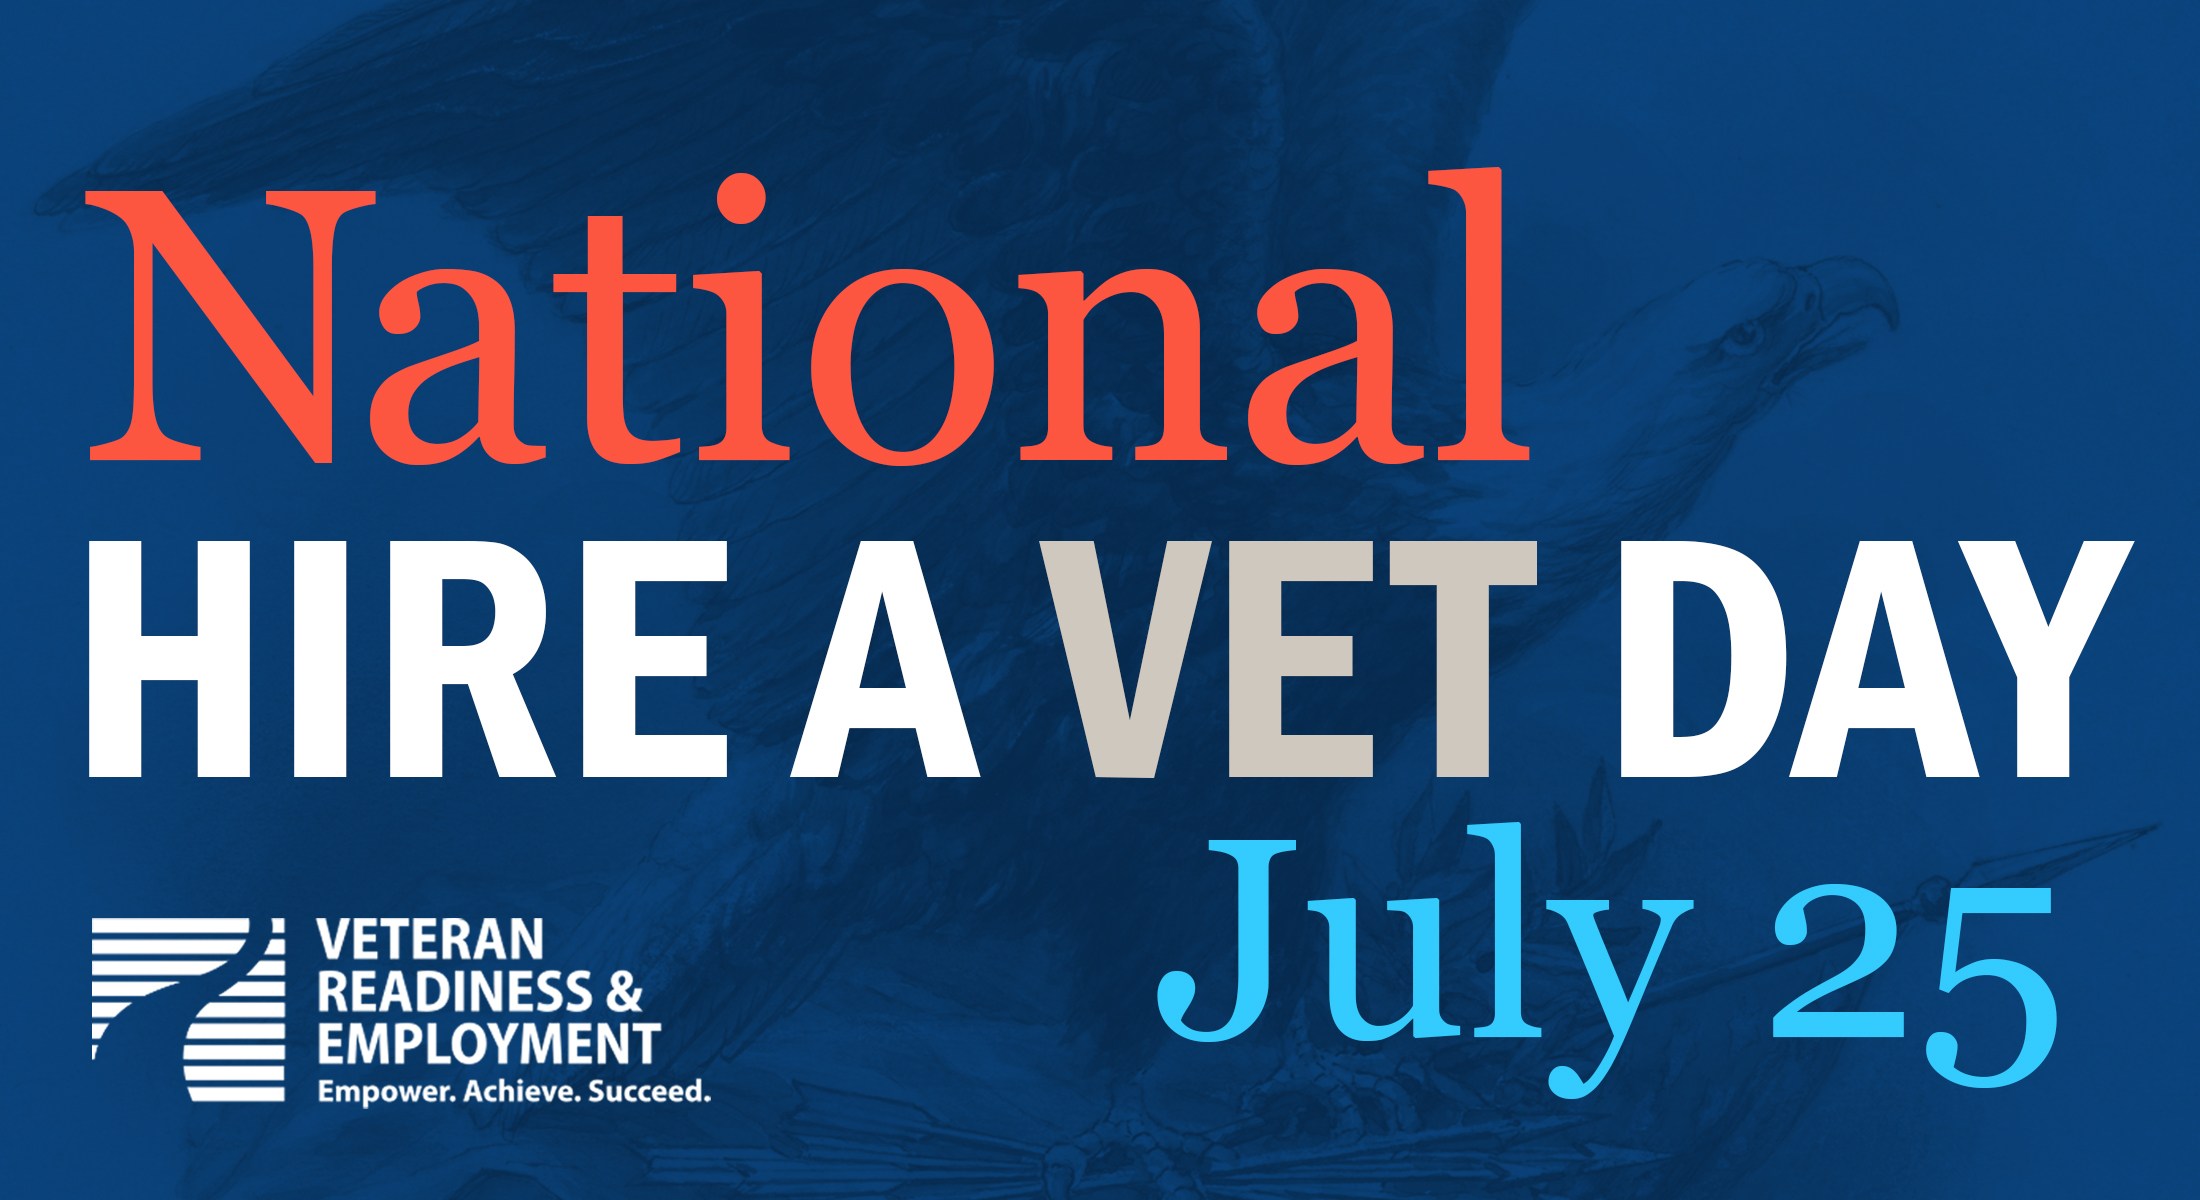 Hire a Vet Day